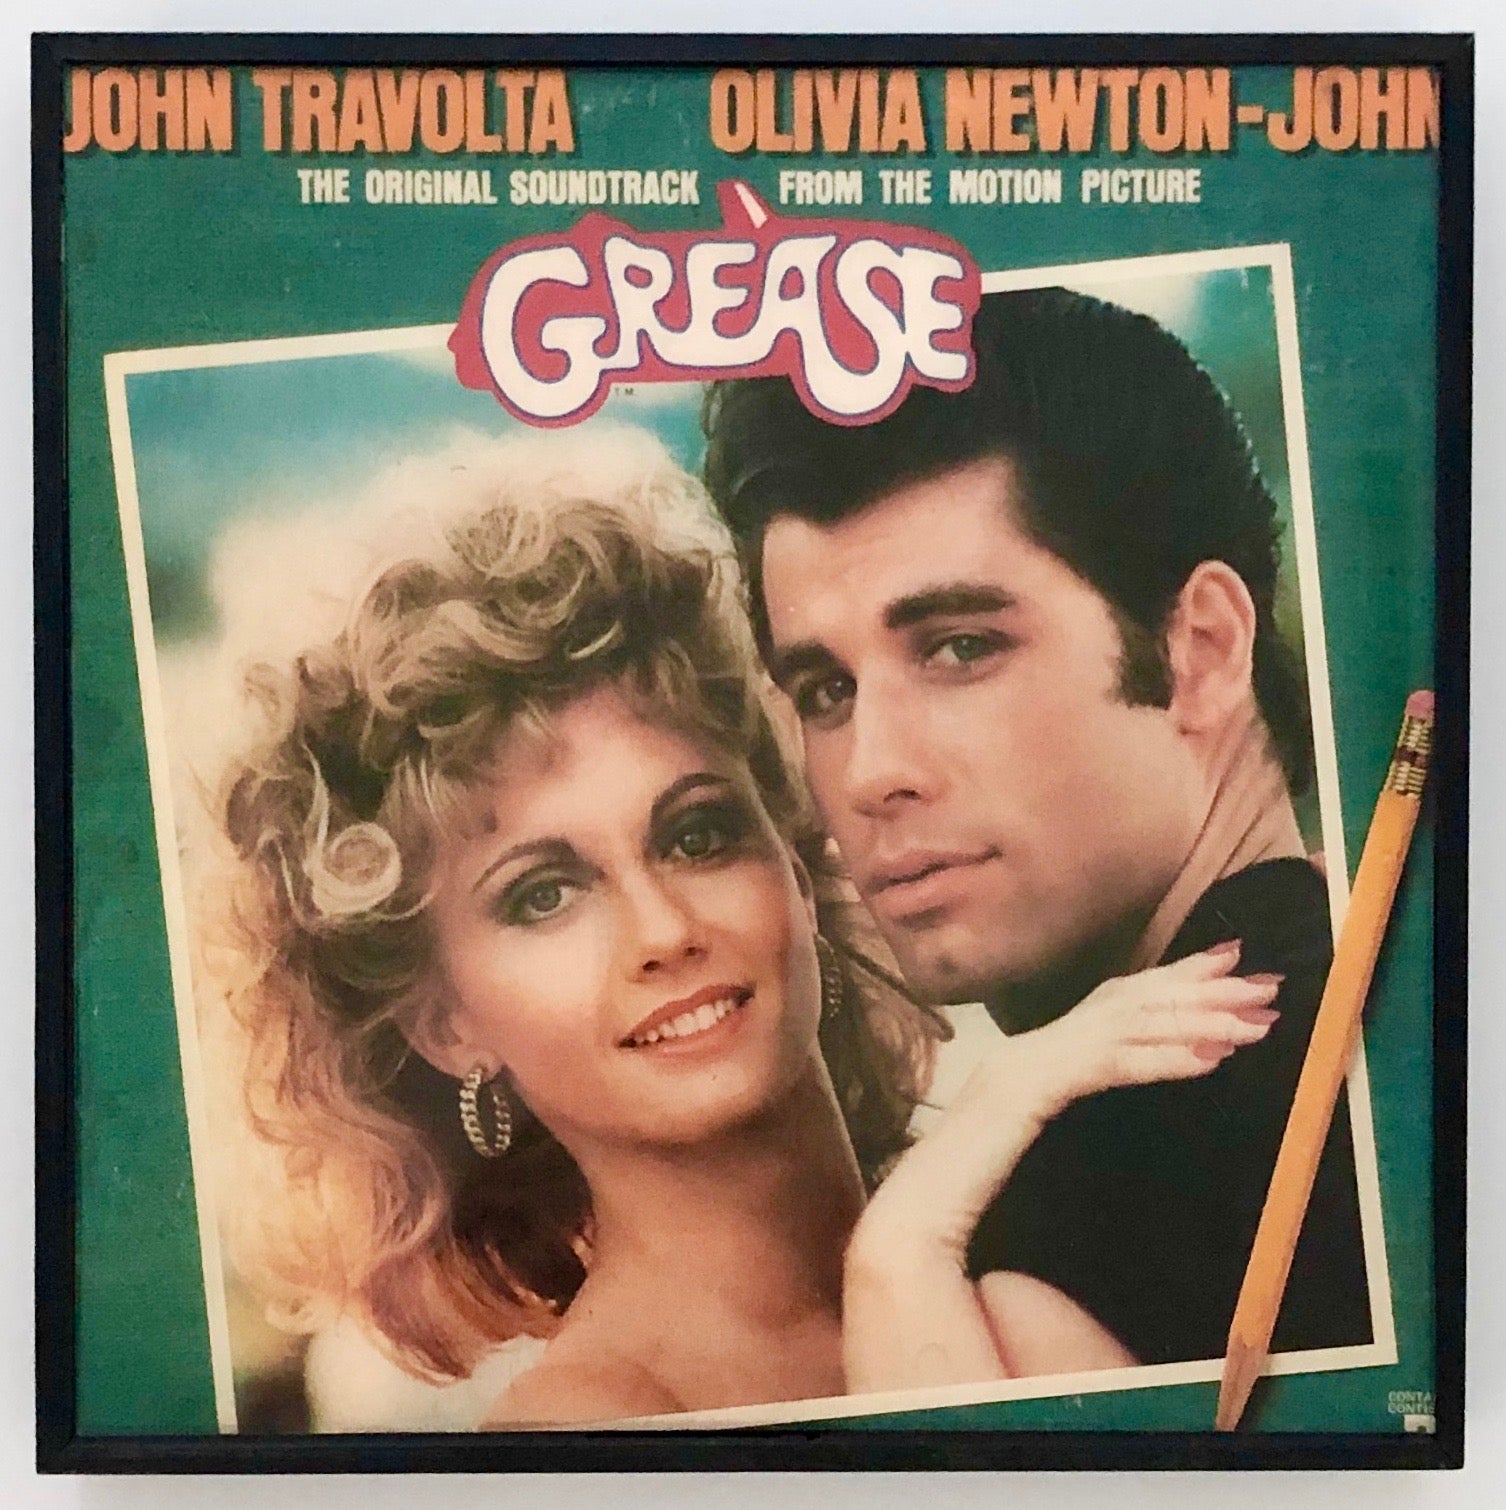 SOUNDTRACK - Grease